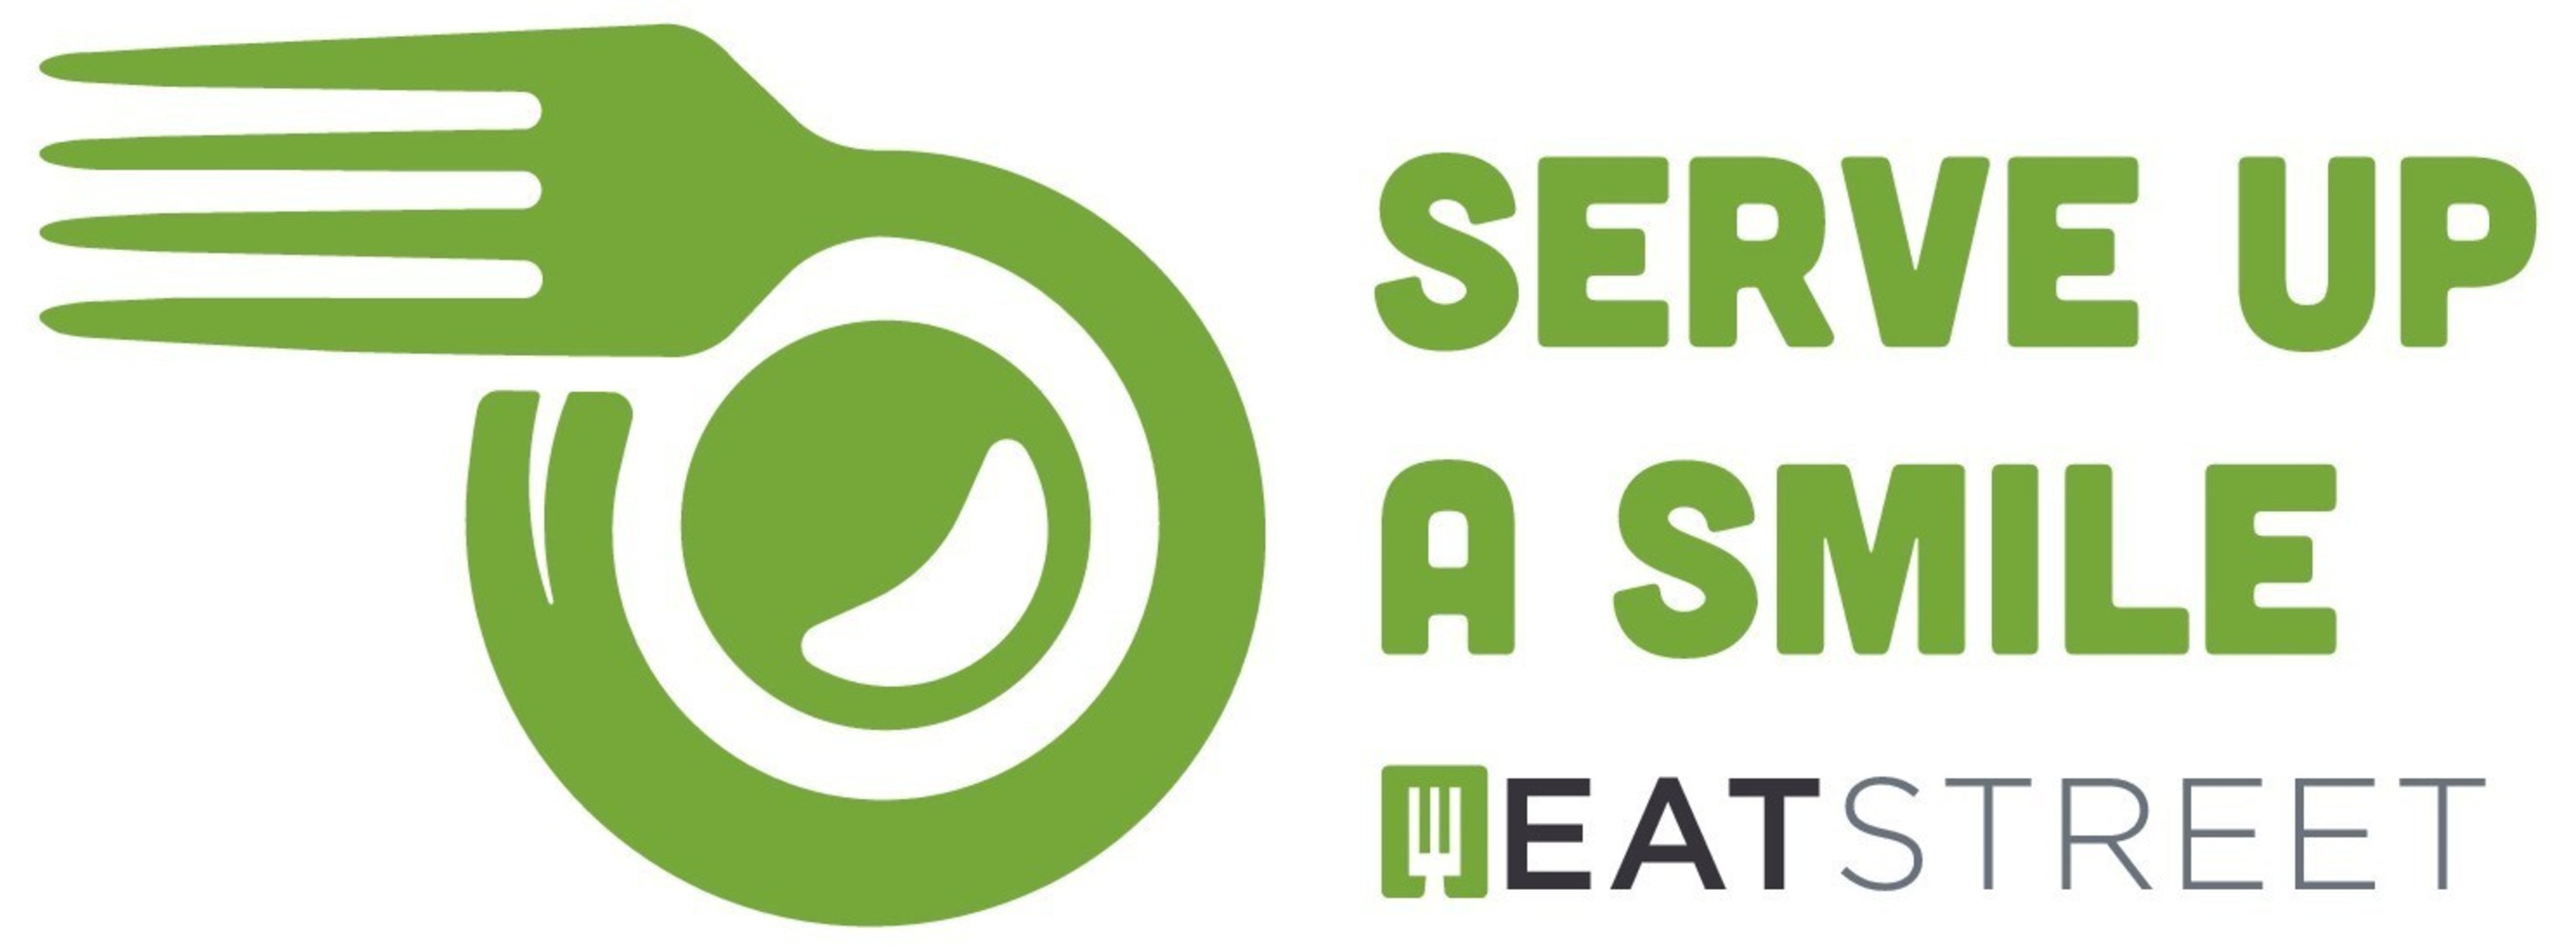 Together EatStreet and Meals On Wheels Association of America will help communities across America fight senior isolation and hunger with their "Serve Up A Smile" program.